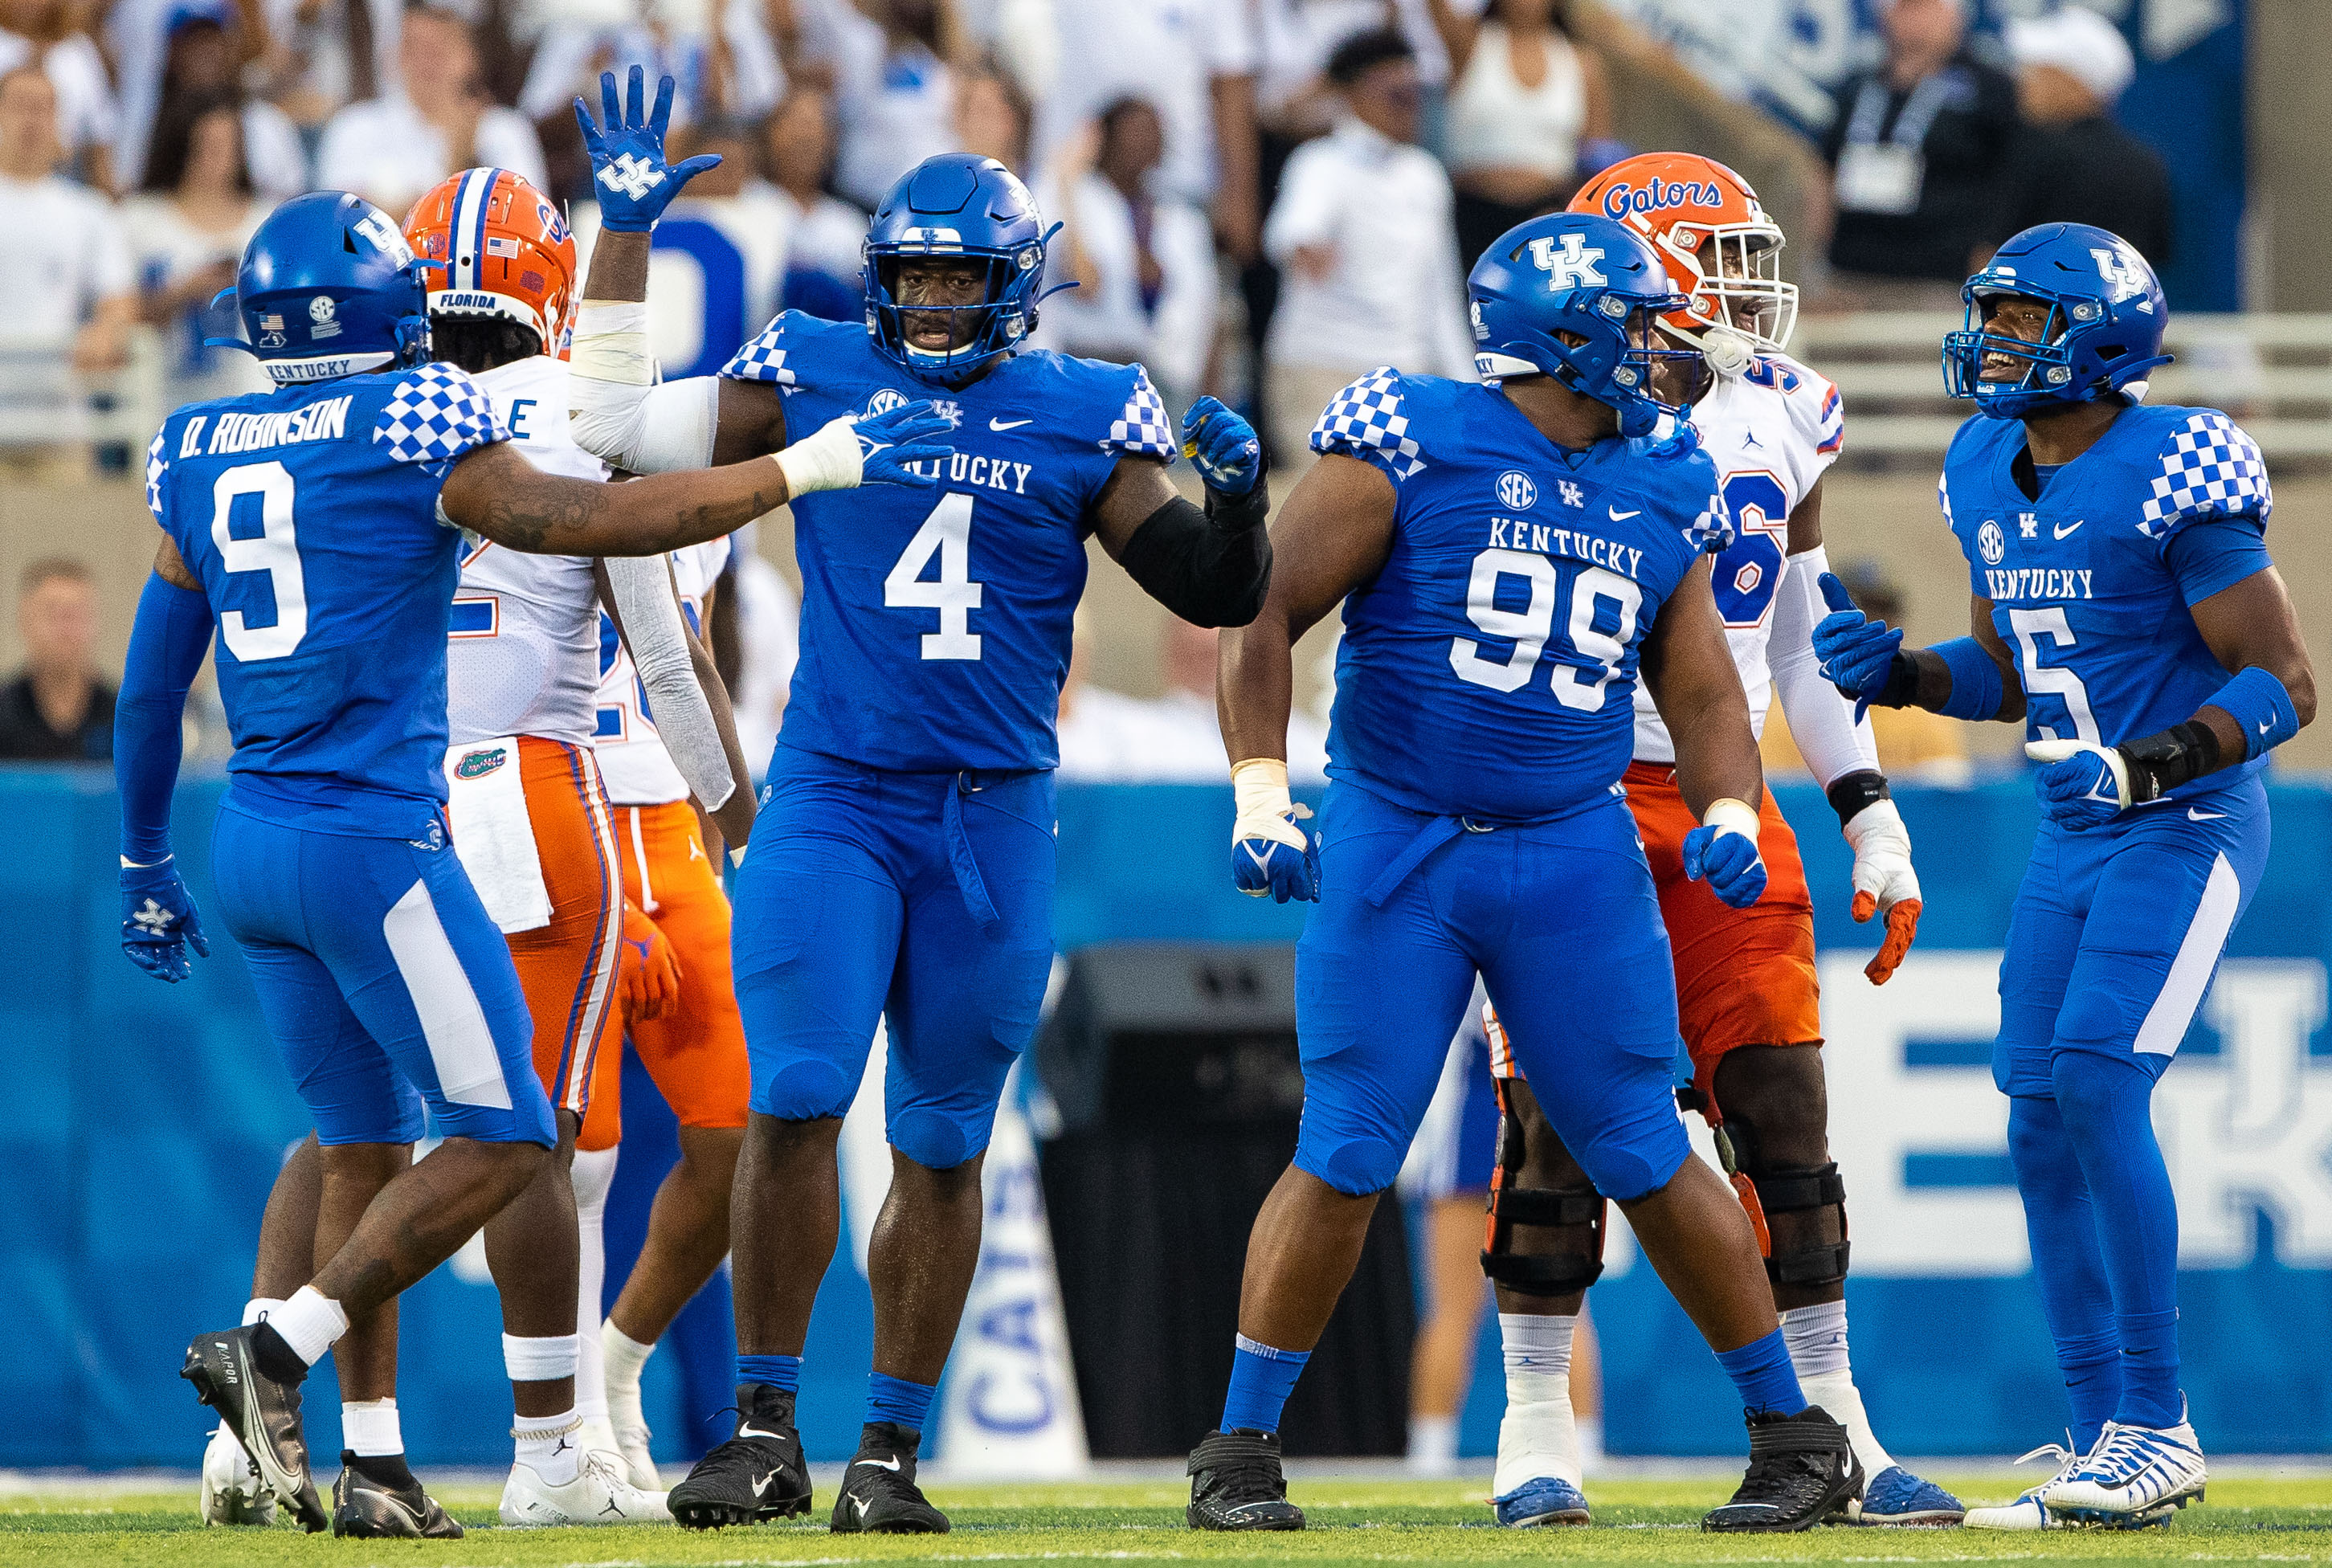 Kentucky Wildcats defensive back Davonte Robinson (9), defensive end Josh Paschal (4), defensive lineman Josaih Hayes (99) and linebacker DeAndre Square (5) celebrate a stop during the second quarter against the Florida Gators at Kroger Field.